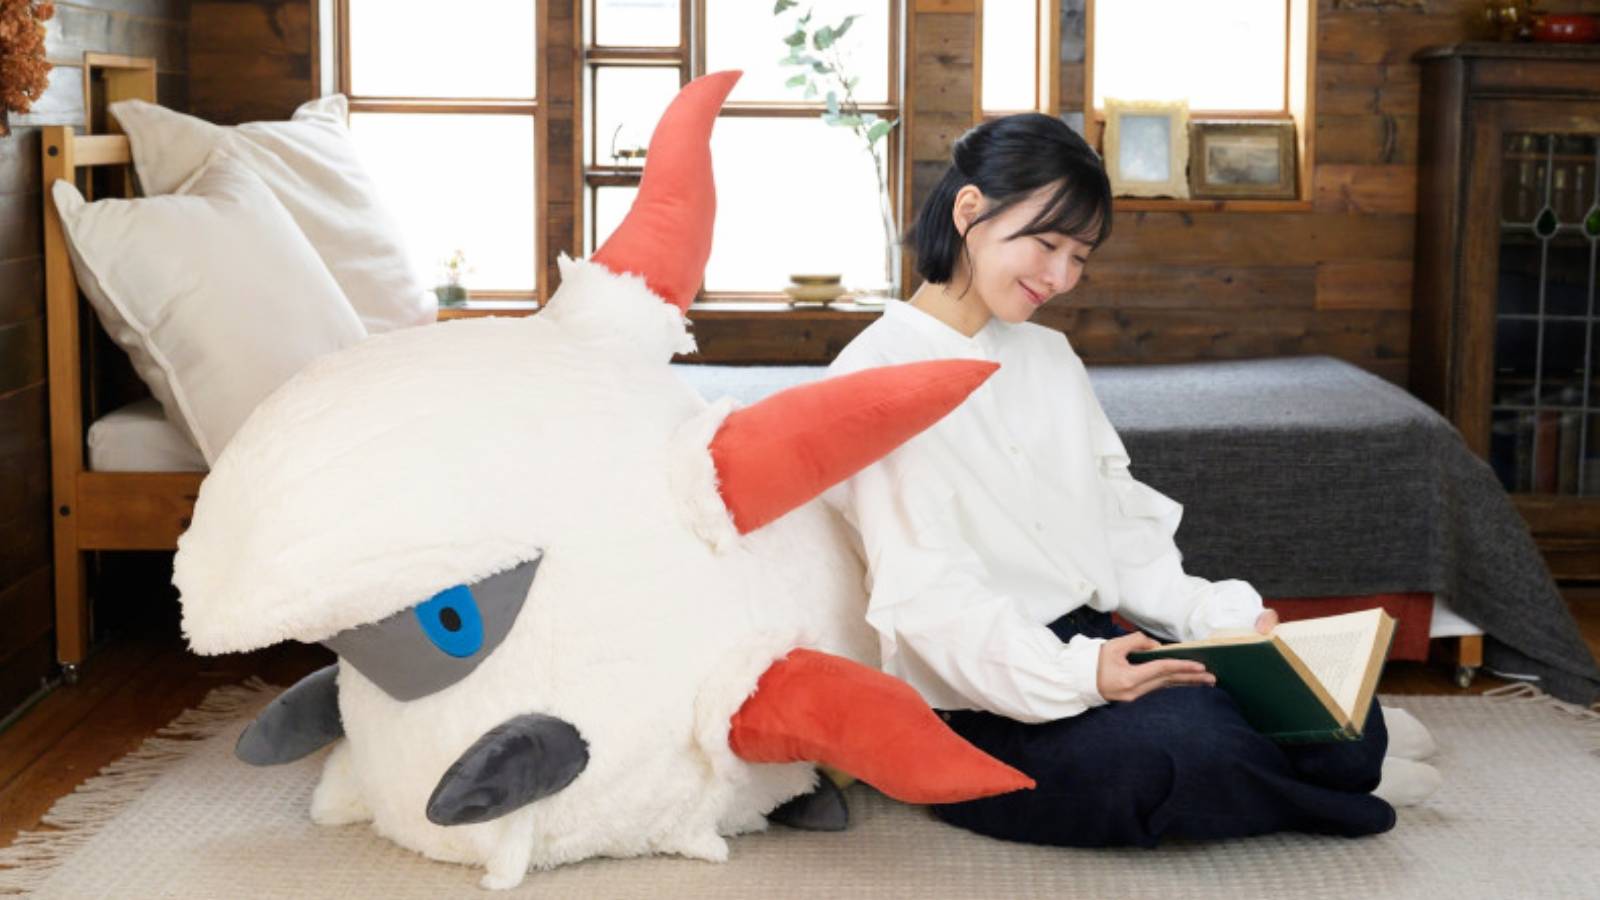 A promotional image for a life size Larvesta plush shows the large stuffed toy next to a person reading